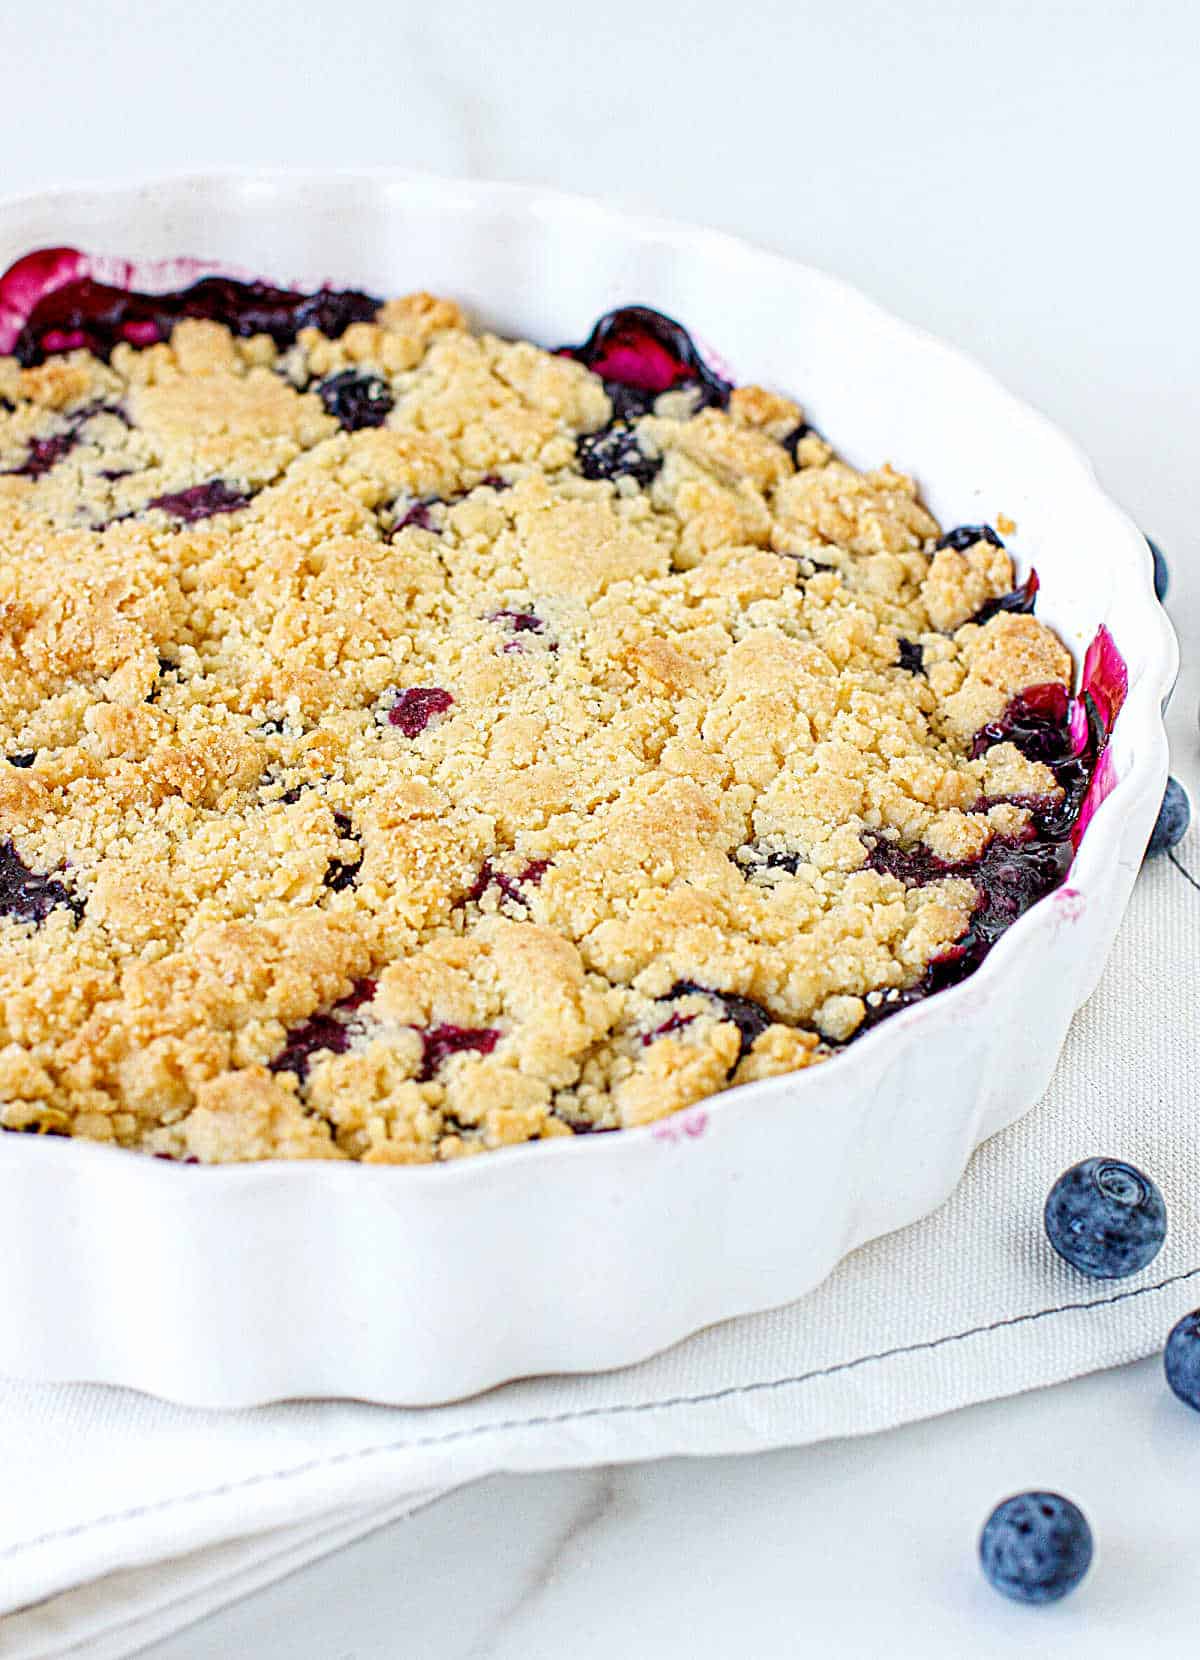 Partial view of round white dish with bluberry crumb cake, white surface, loose blueberries